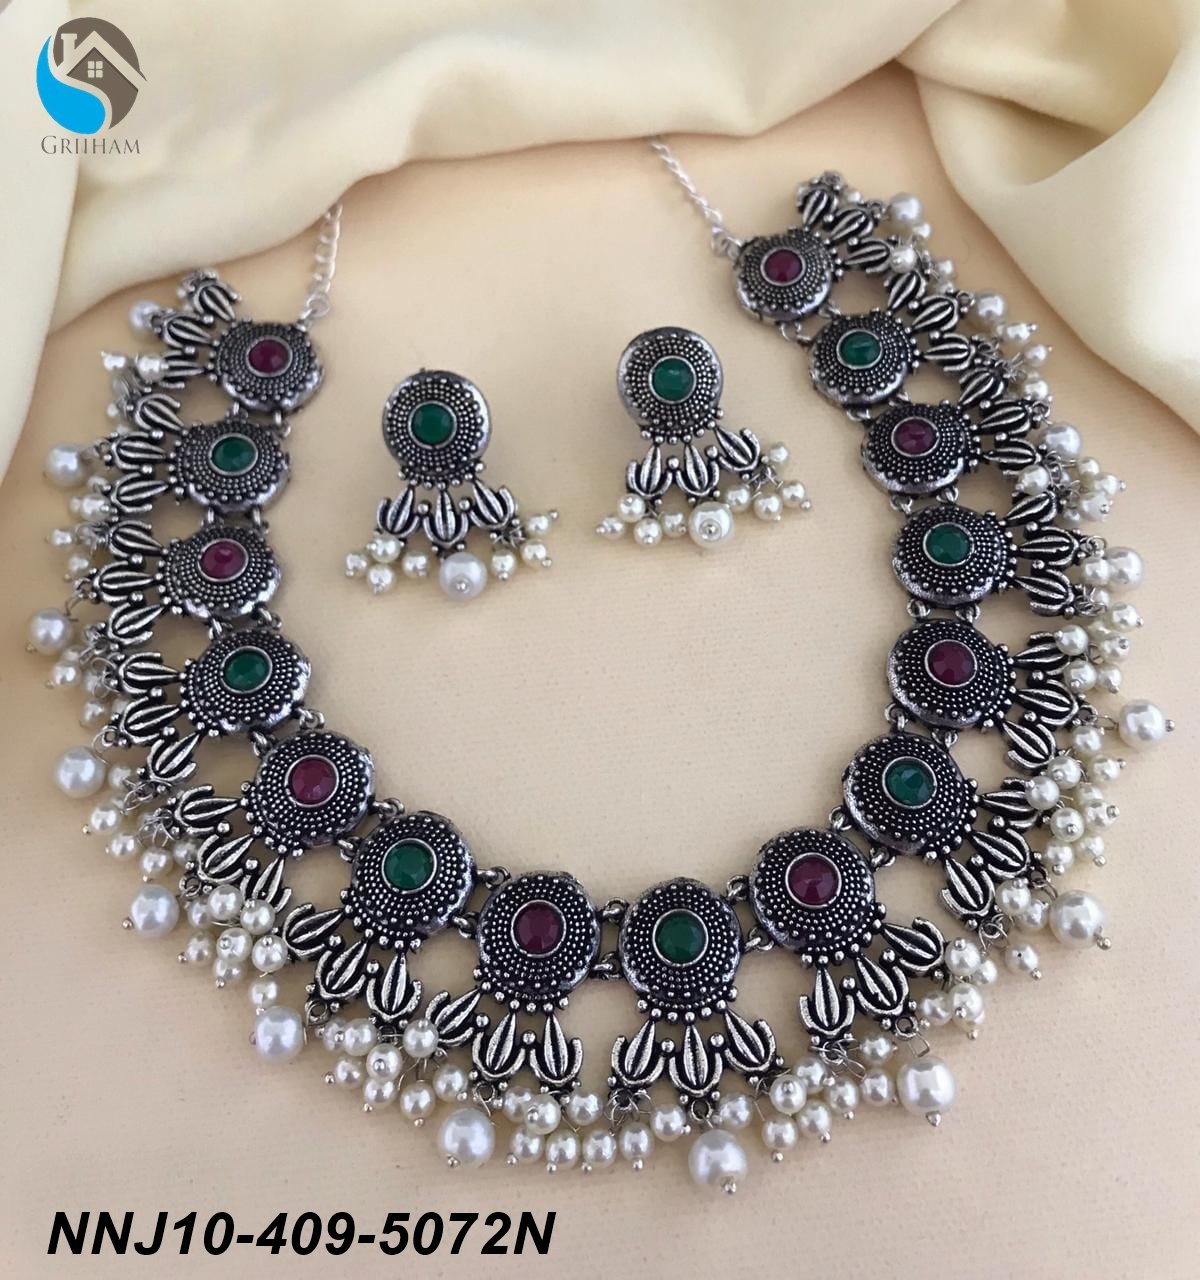 Silver Oxidised Jewelry with Red Green Stones 5072N